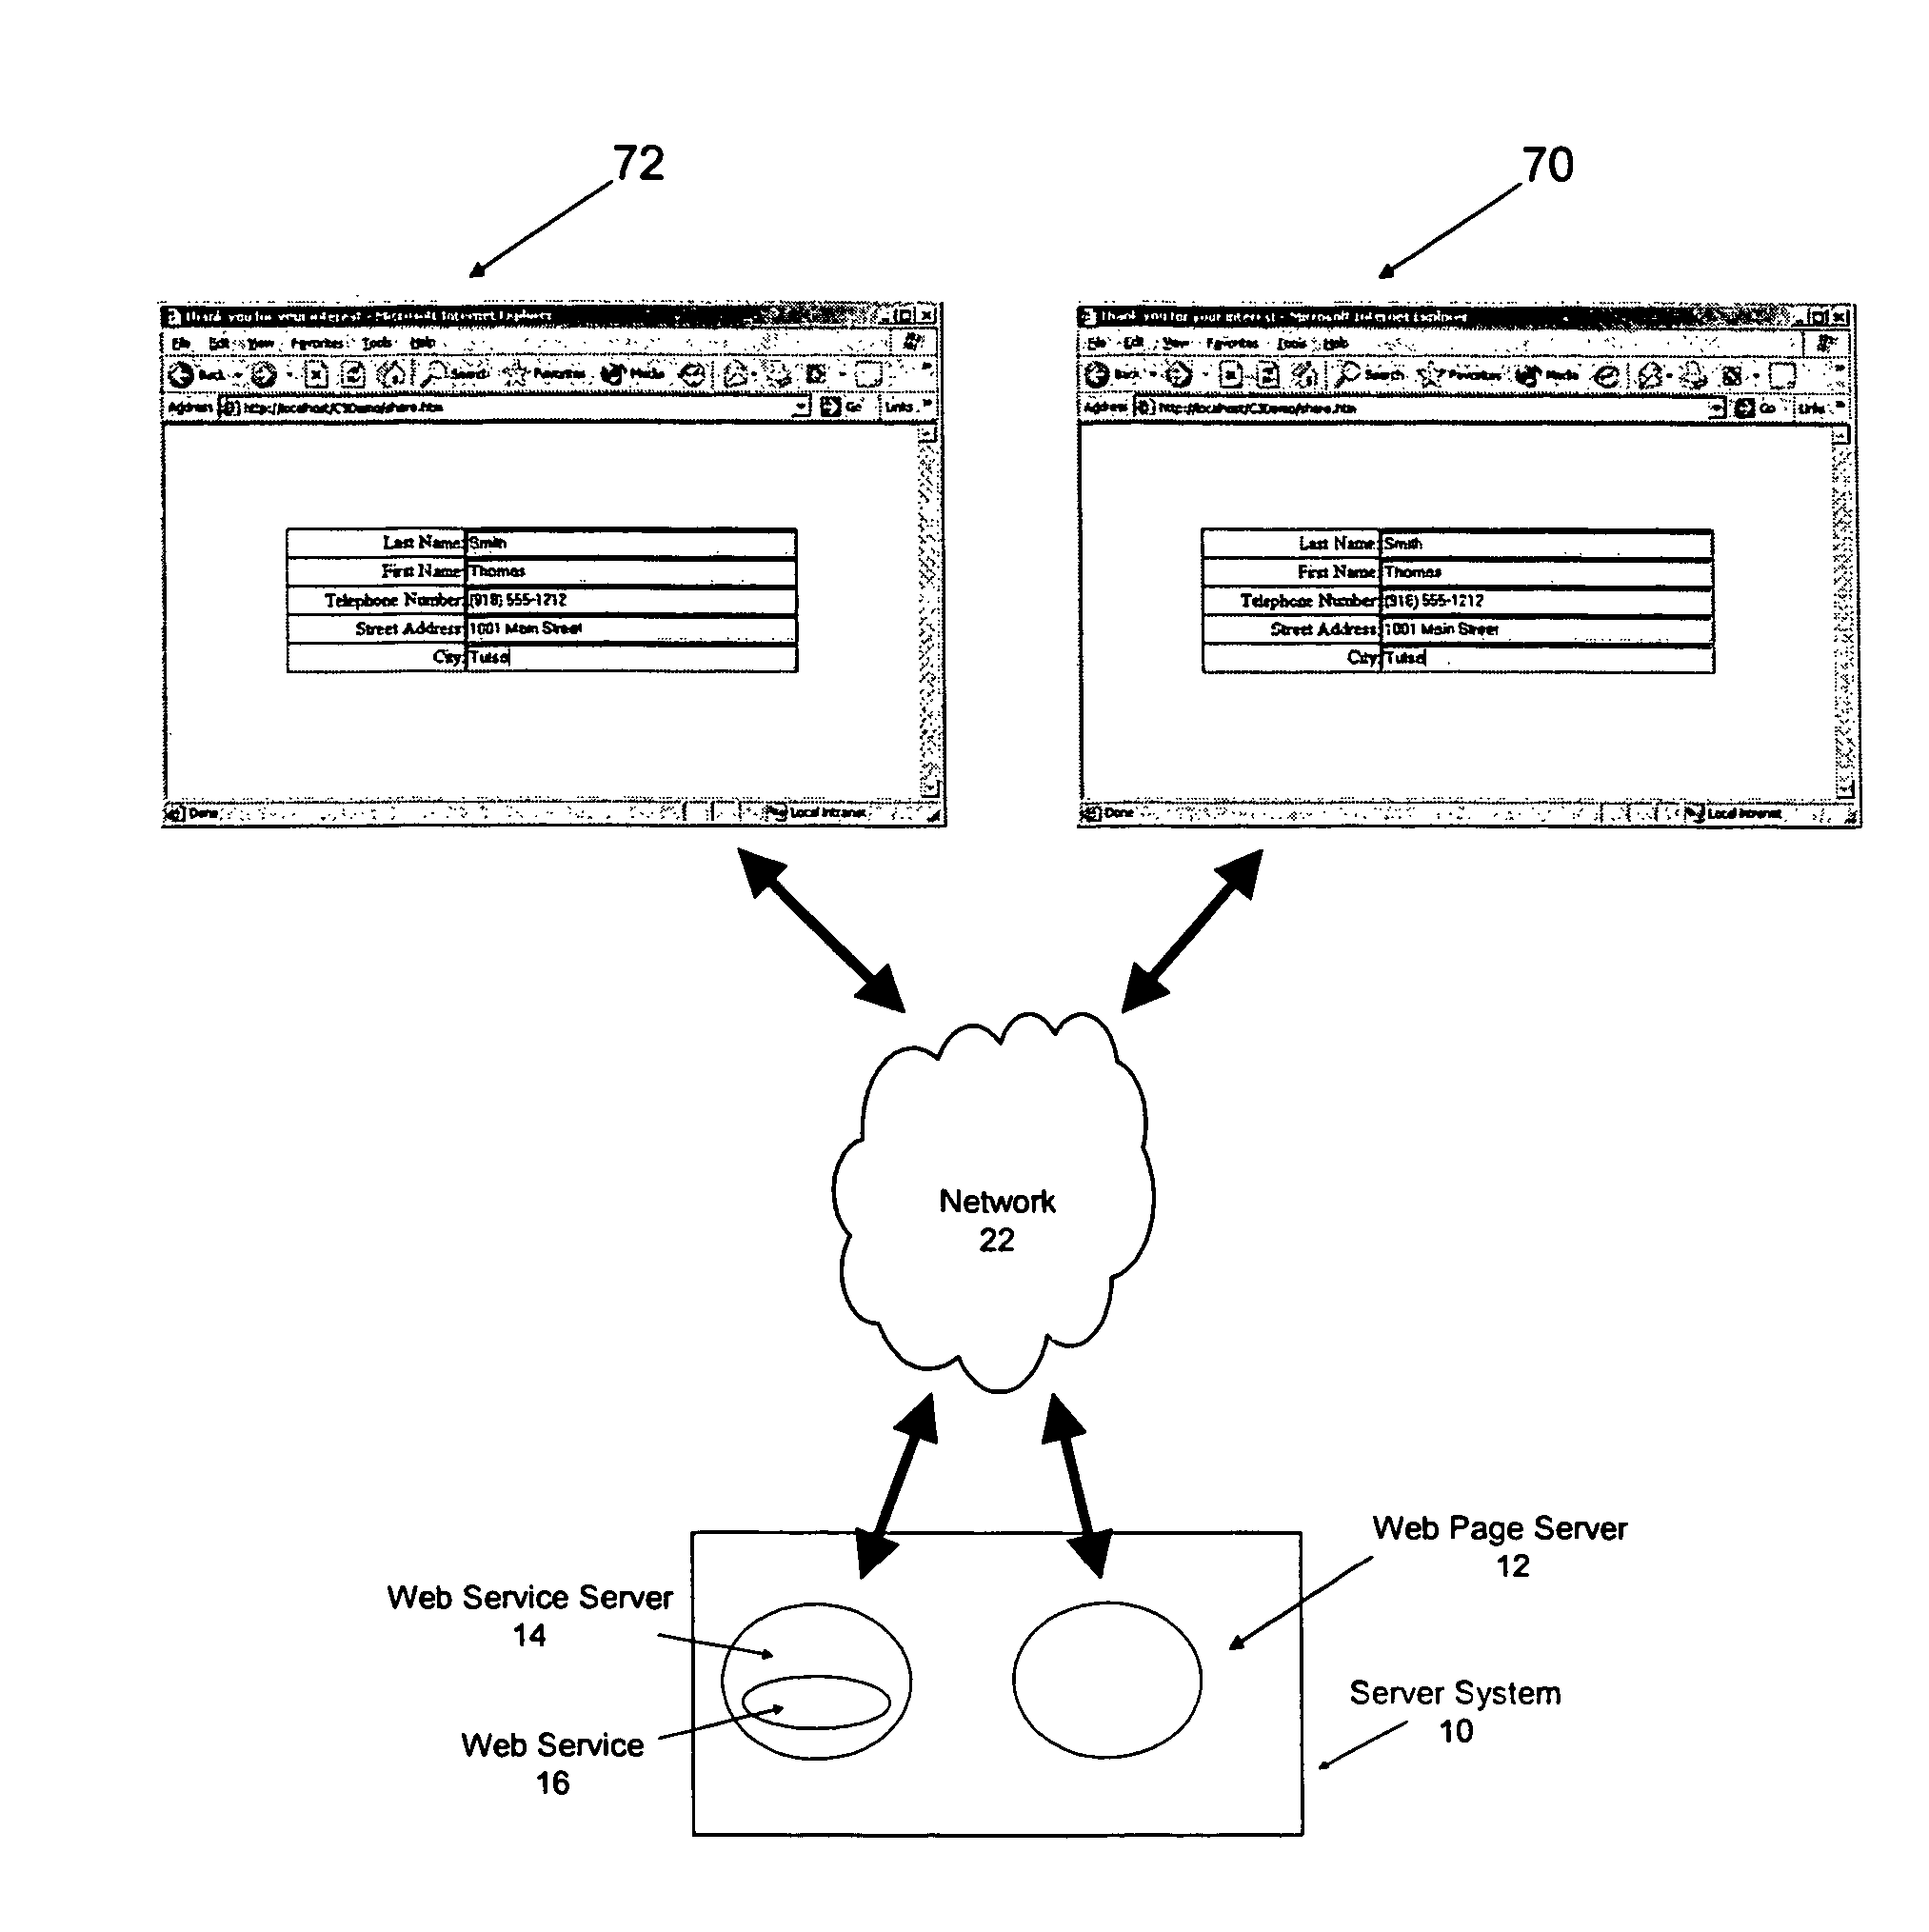 Apparatus and method for remotely sharing information and providing remote interactive assistance via a communications network